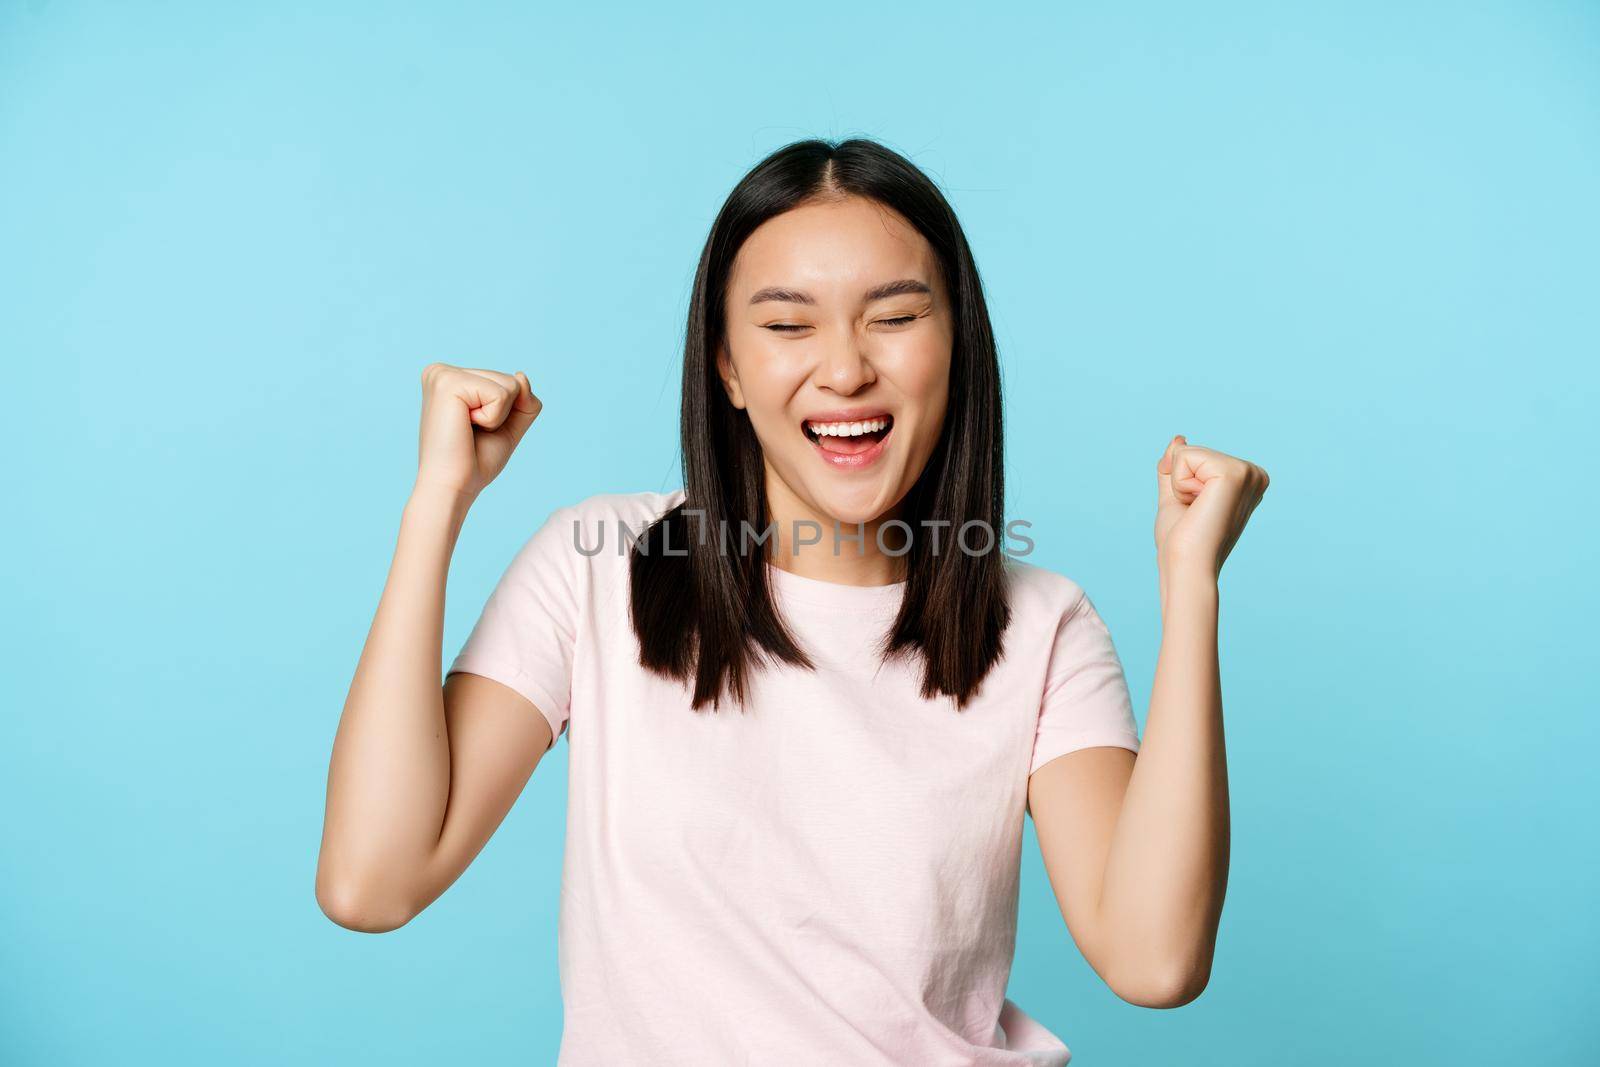 Happy satisfied korean girl winning, celebrating victory, triumphing with fist pump, scream of joy, standing over blue background.